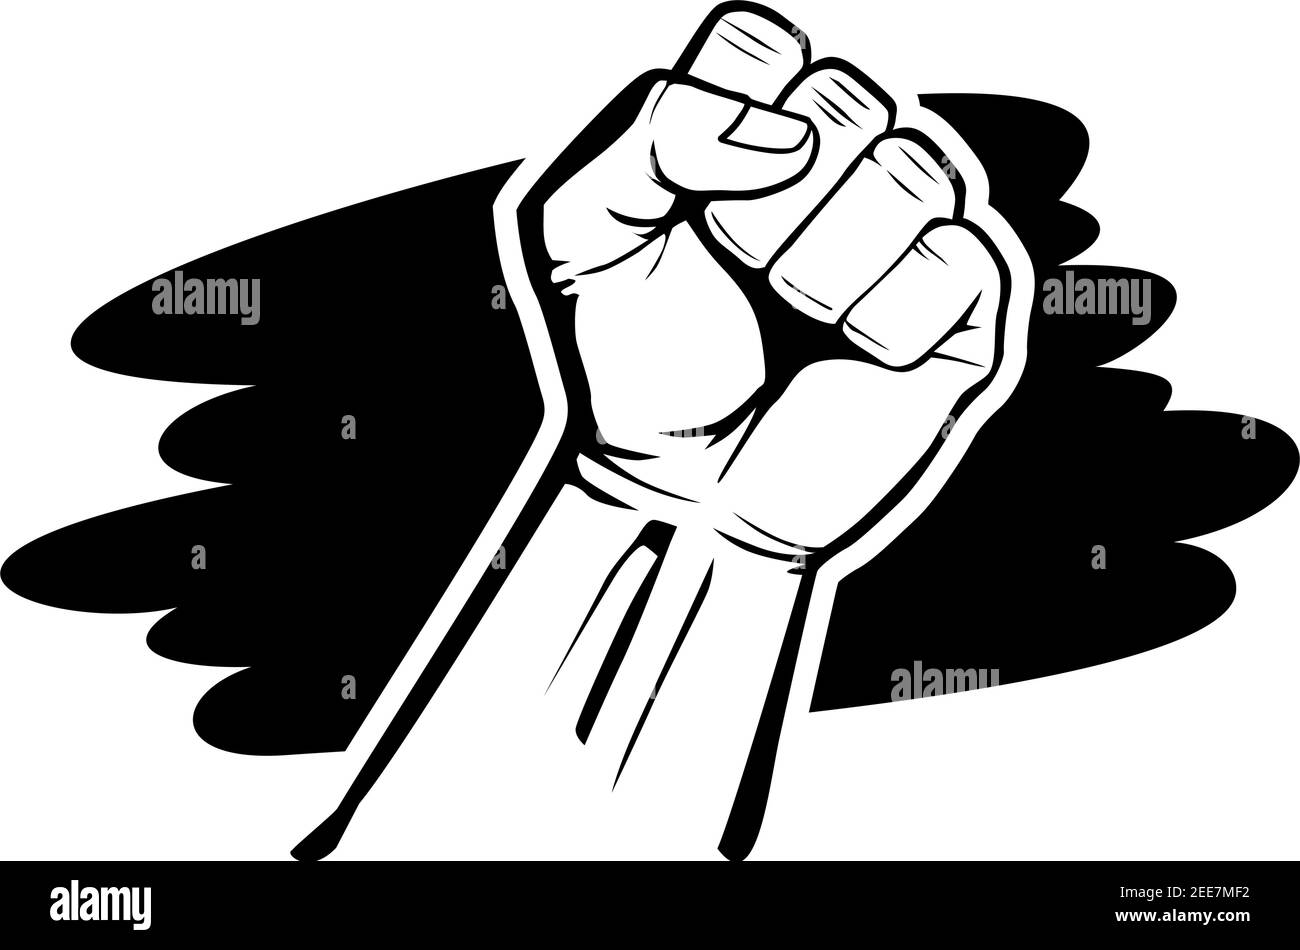 Raised Clenched Fist Of Protest Against Black Cloud Background